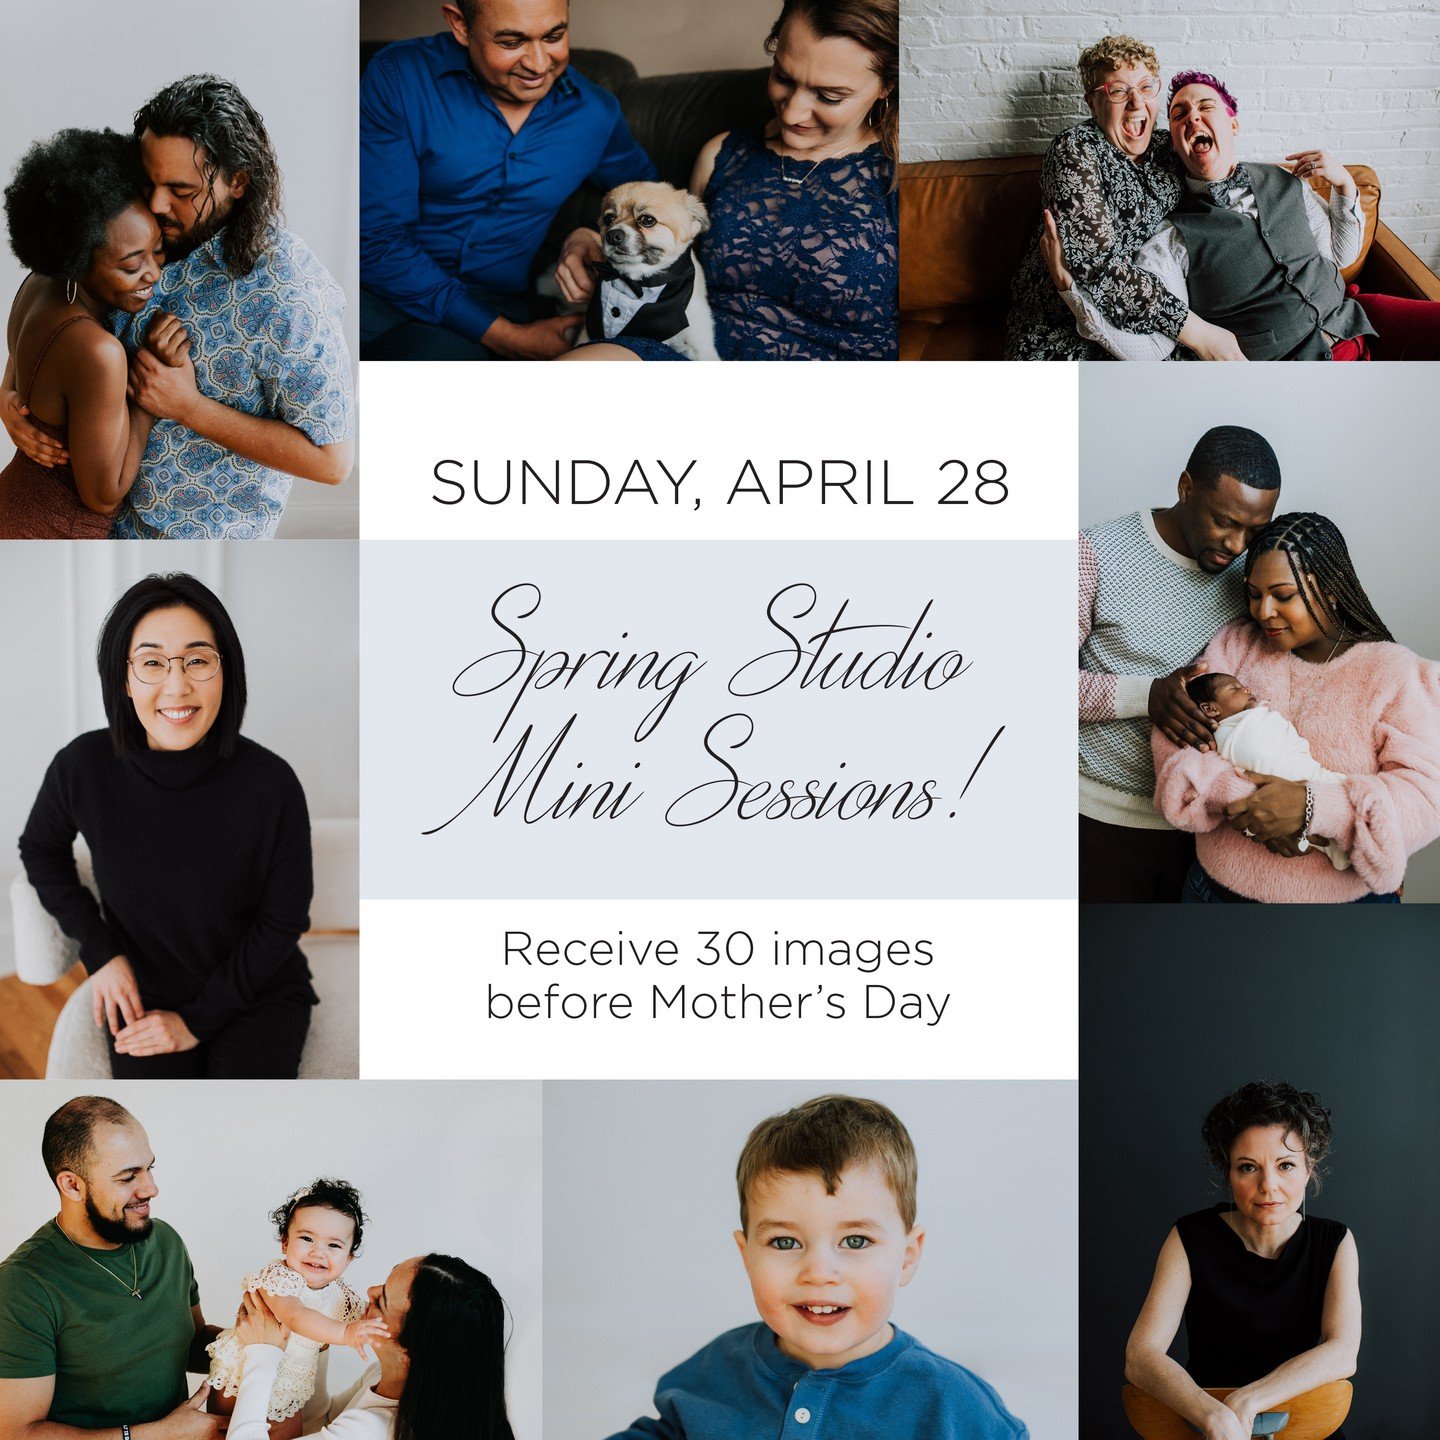 Whether for your kiddos, your loved one, your pet, or yourself, let's get you some fresh new images this spring! I'm doing limited mini sessions at a beautiful studio in Wicker Park on Sunday, April 28. They're $395 for minimum 30 images, all of whic